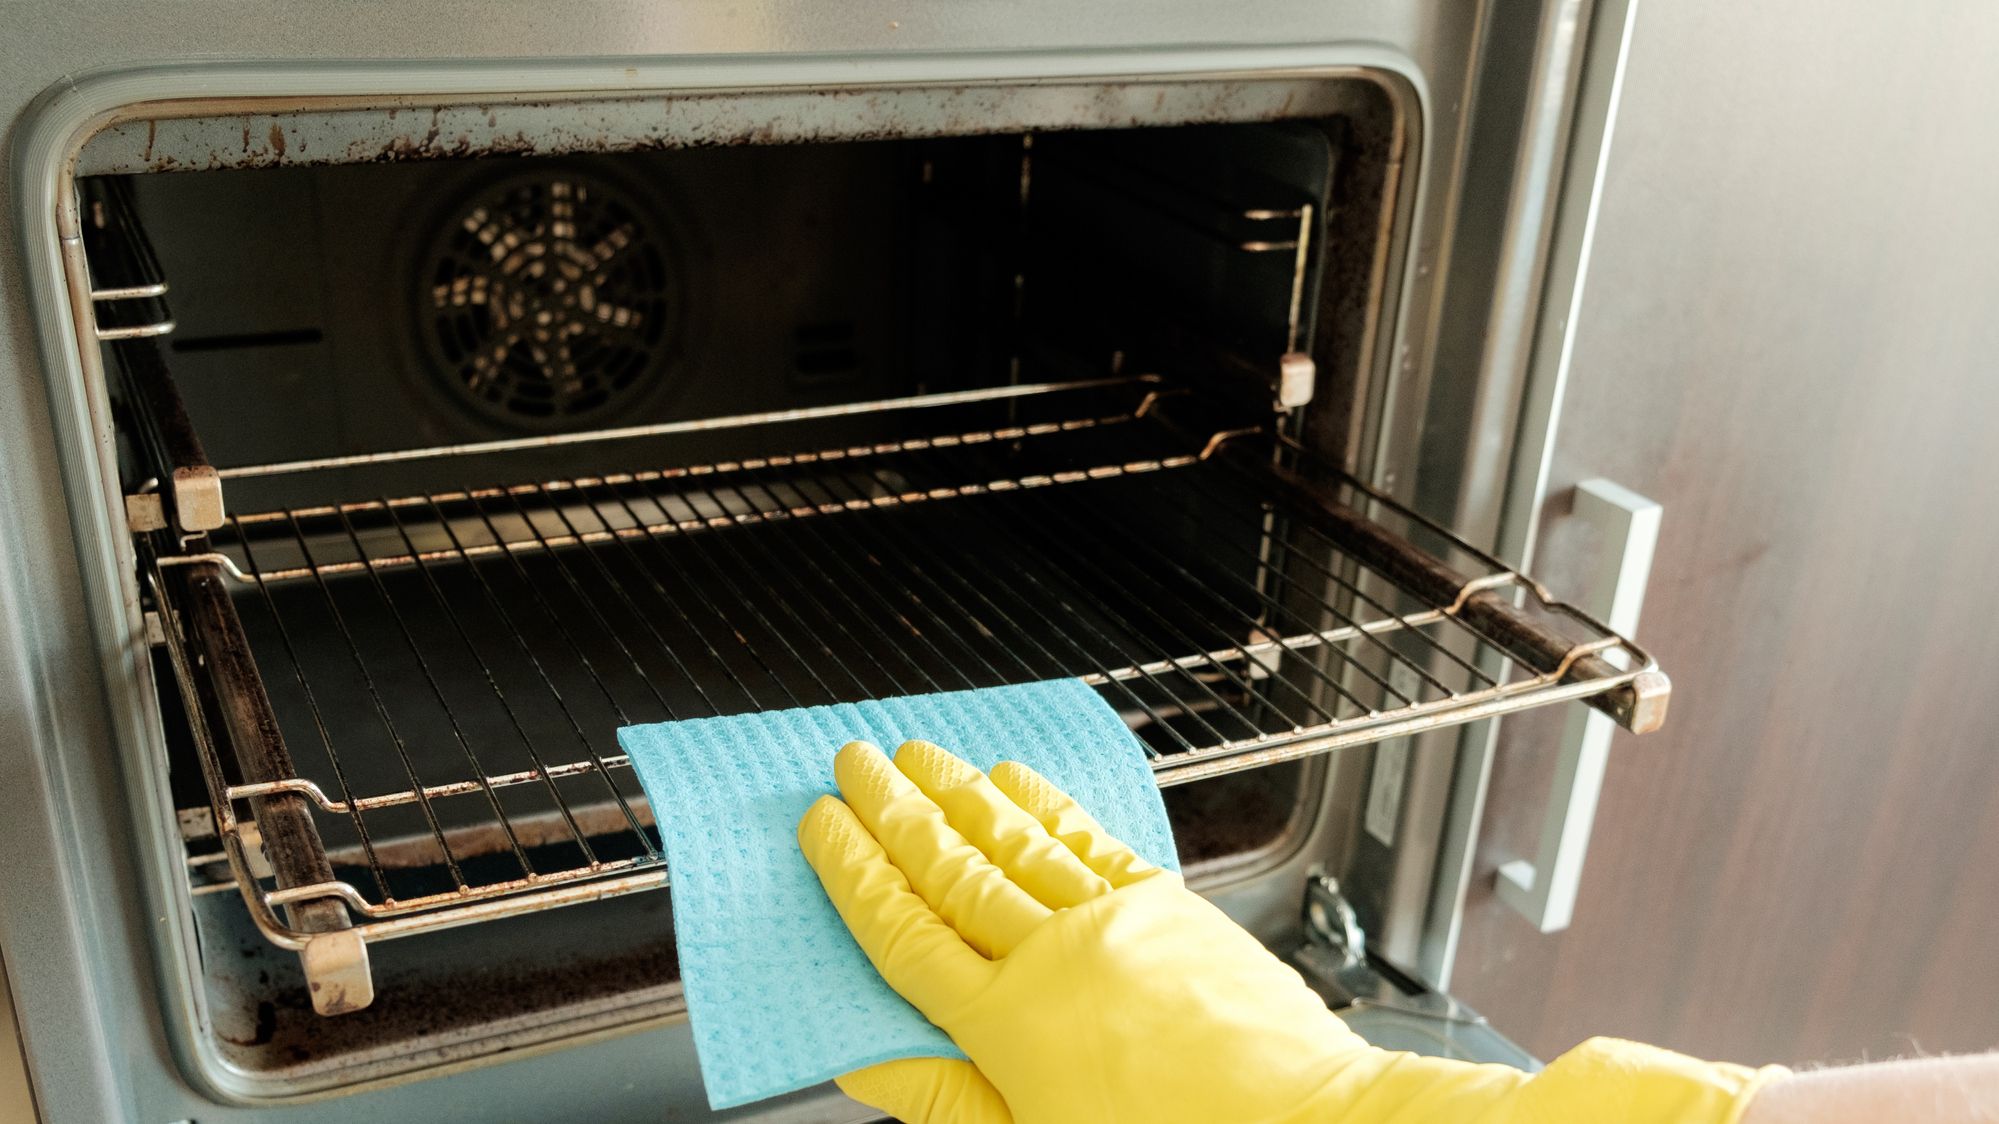 https://hips.hearstapps.com/hmg-prod/images/man-with-rag-and-rubber-gloves-cleaning-kitchen-royalty-free-image-1647437947.jpg?crop=1xw:0.74975xh;center,top